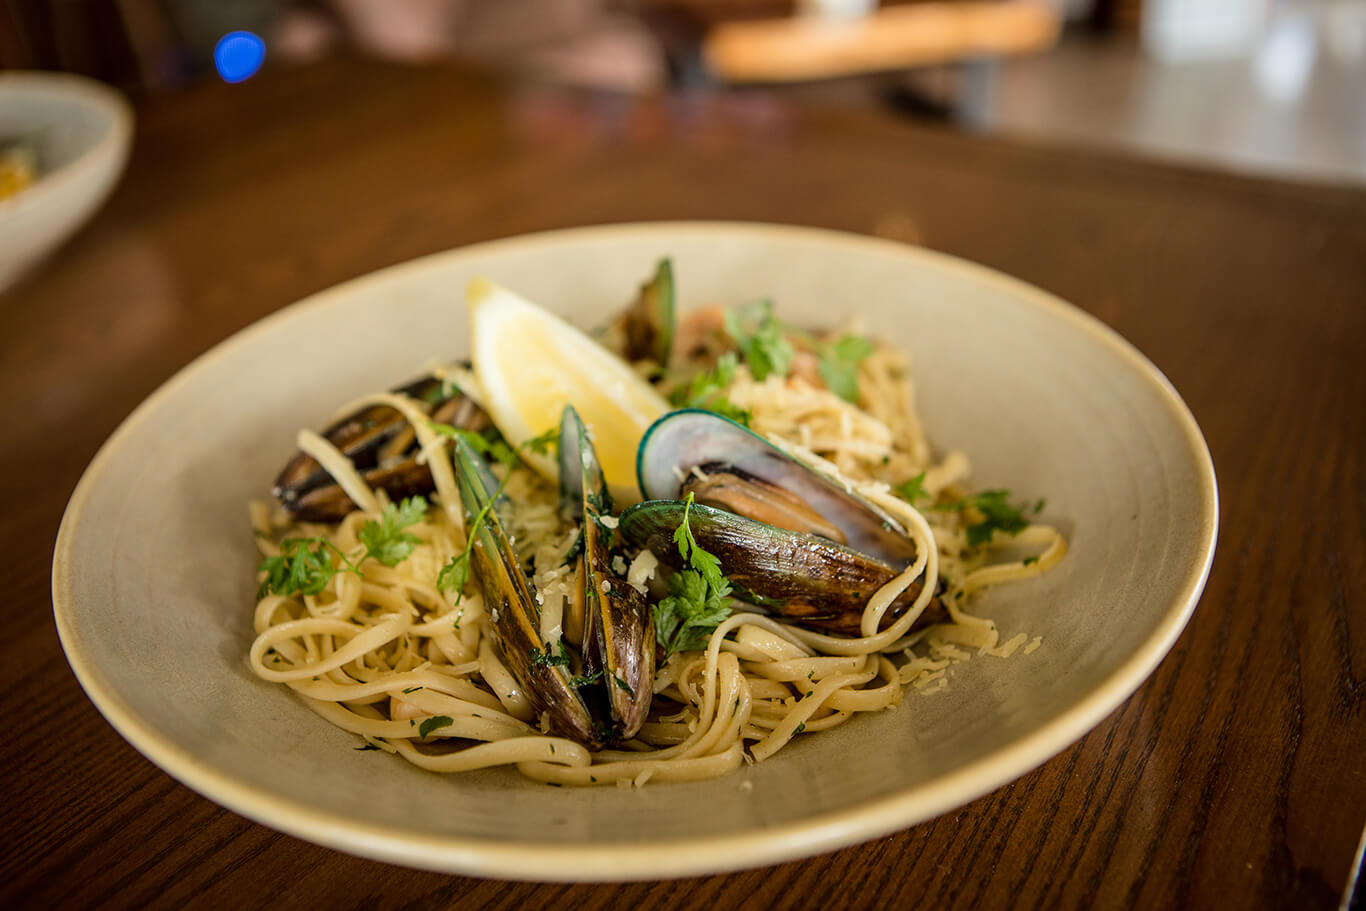 A plate of mussels served on spaghetti pasta with a lemon wedge as garnish